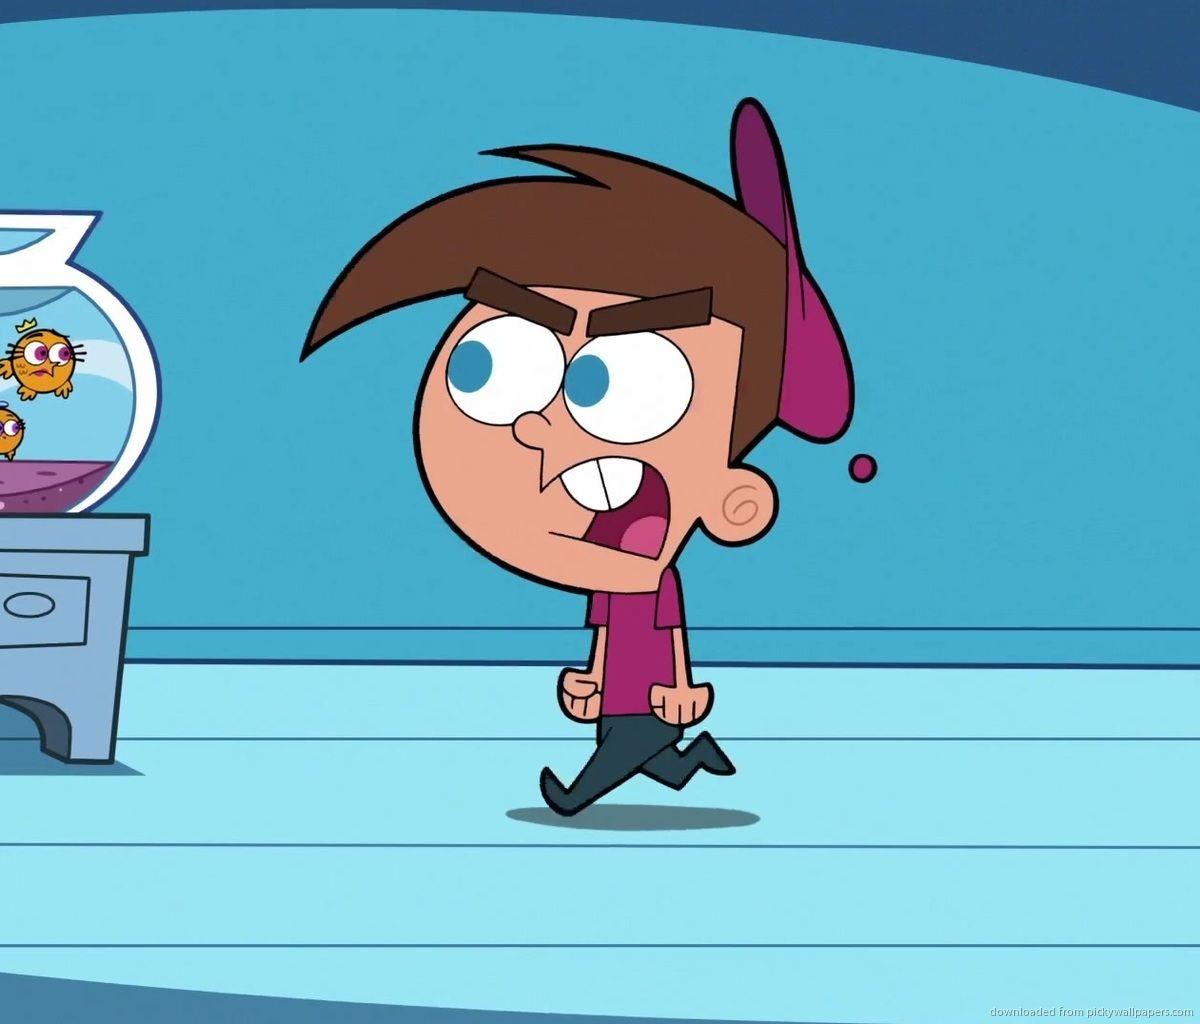 Image result for fairly odd parents timmy